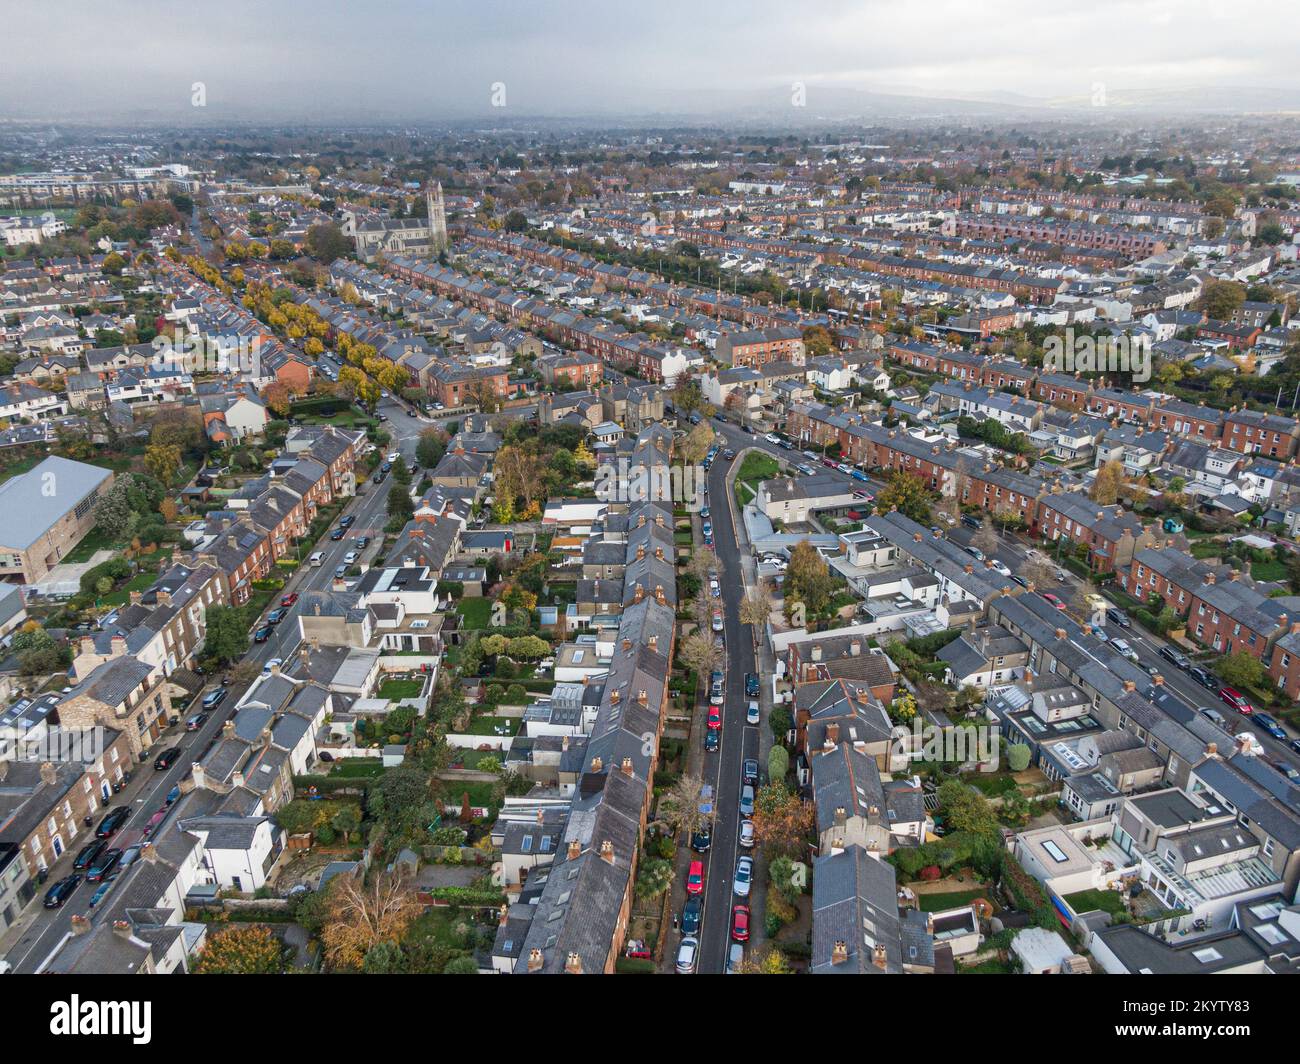 Street and house in the suburbs of Dublin, Ireland, Aerial view Stock Photo